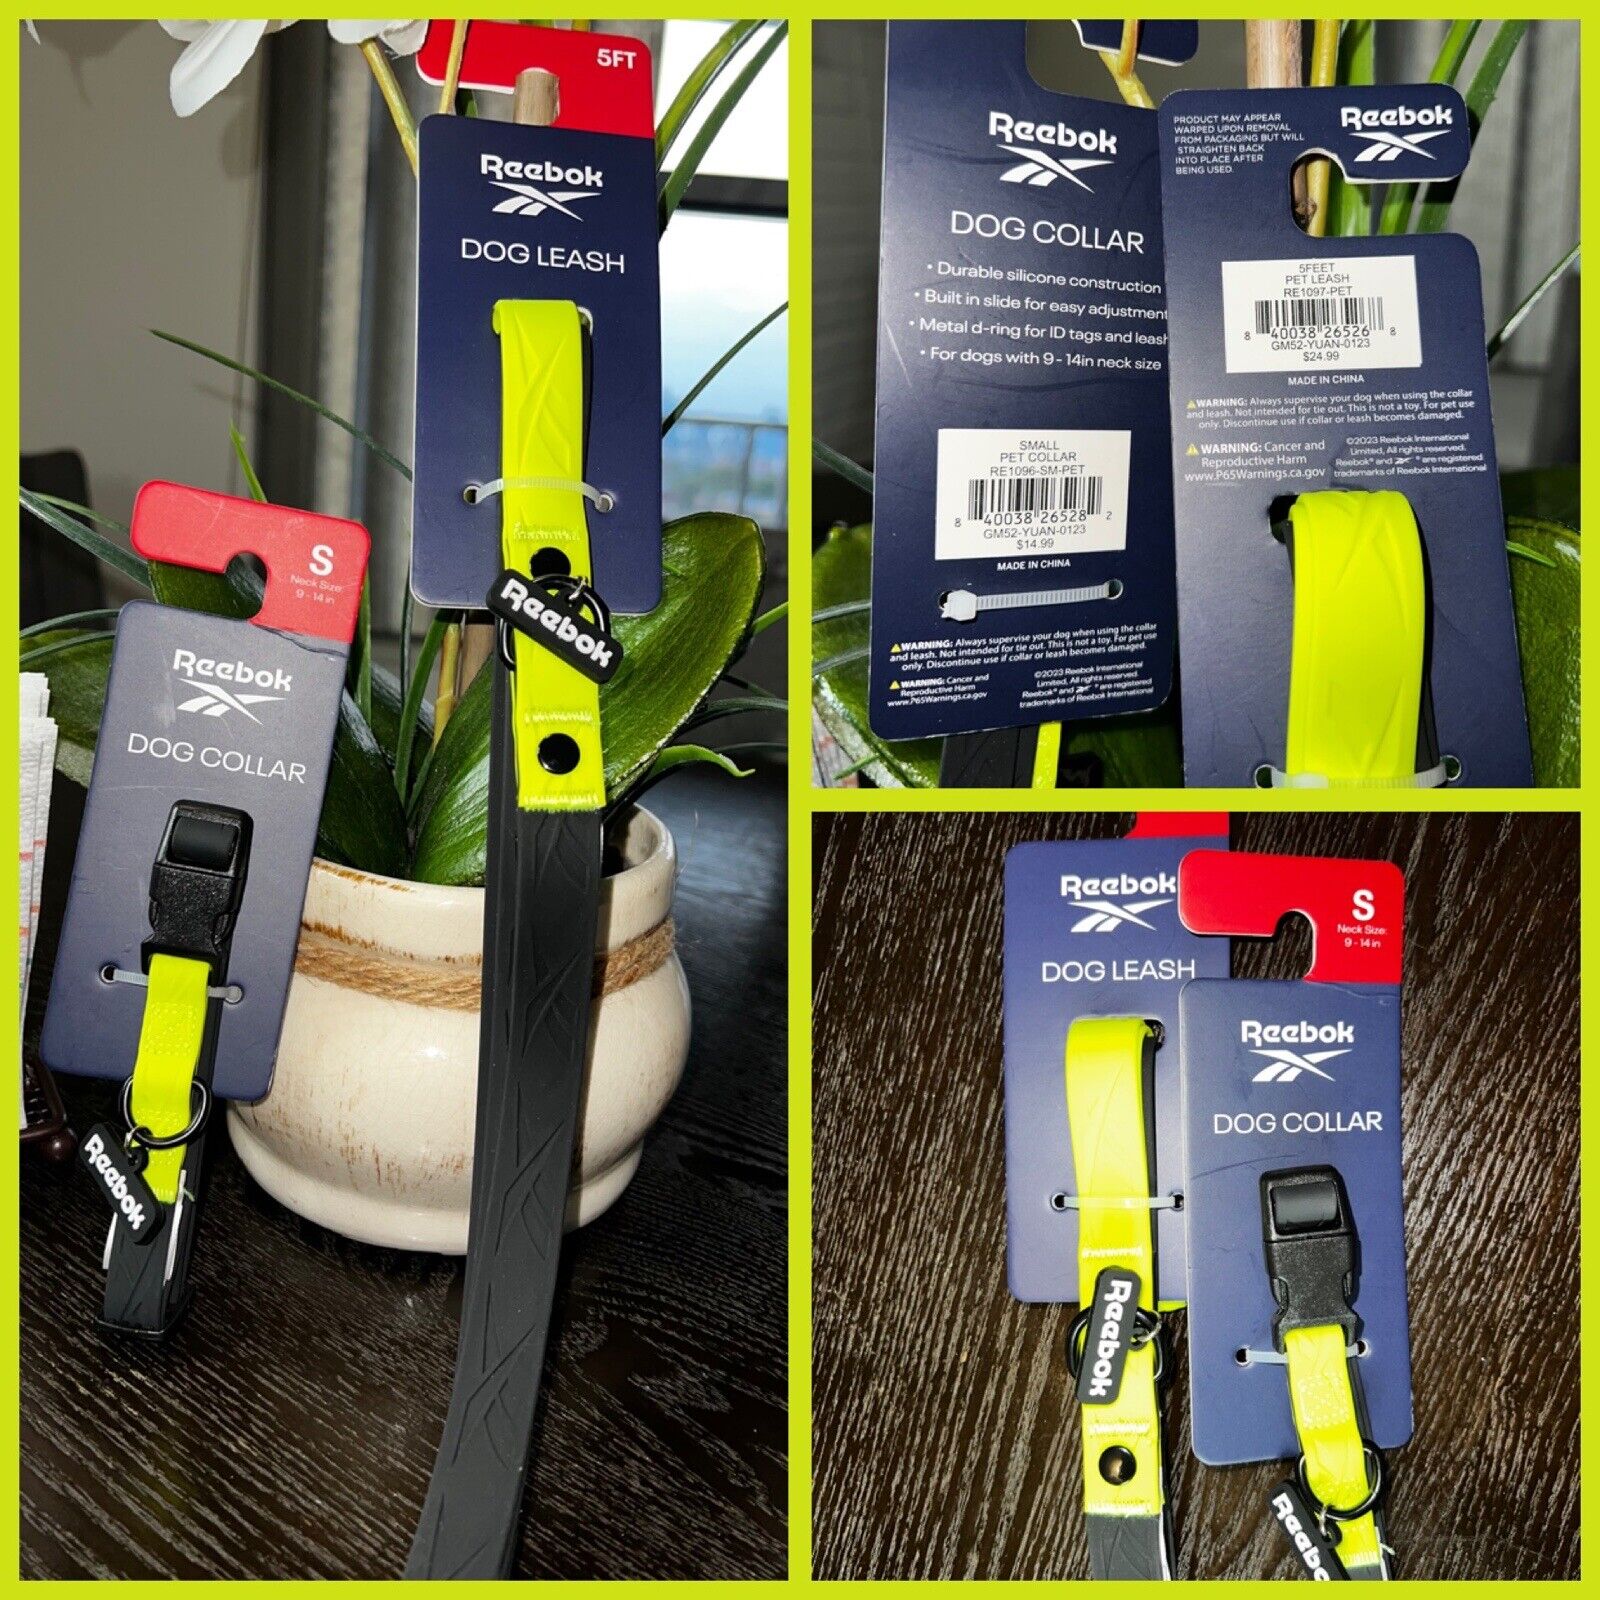 🐶Reebok Dog Collar Small 9-14 In Lime Green & 5ft Leash [Brand New]🐶